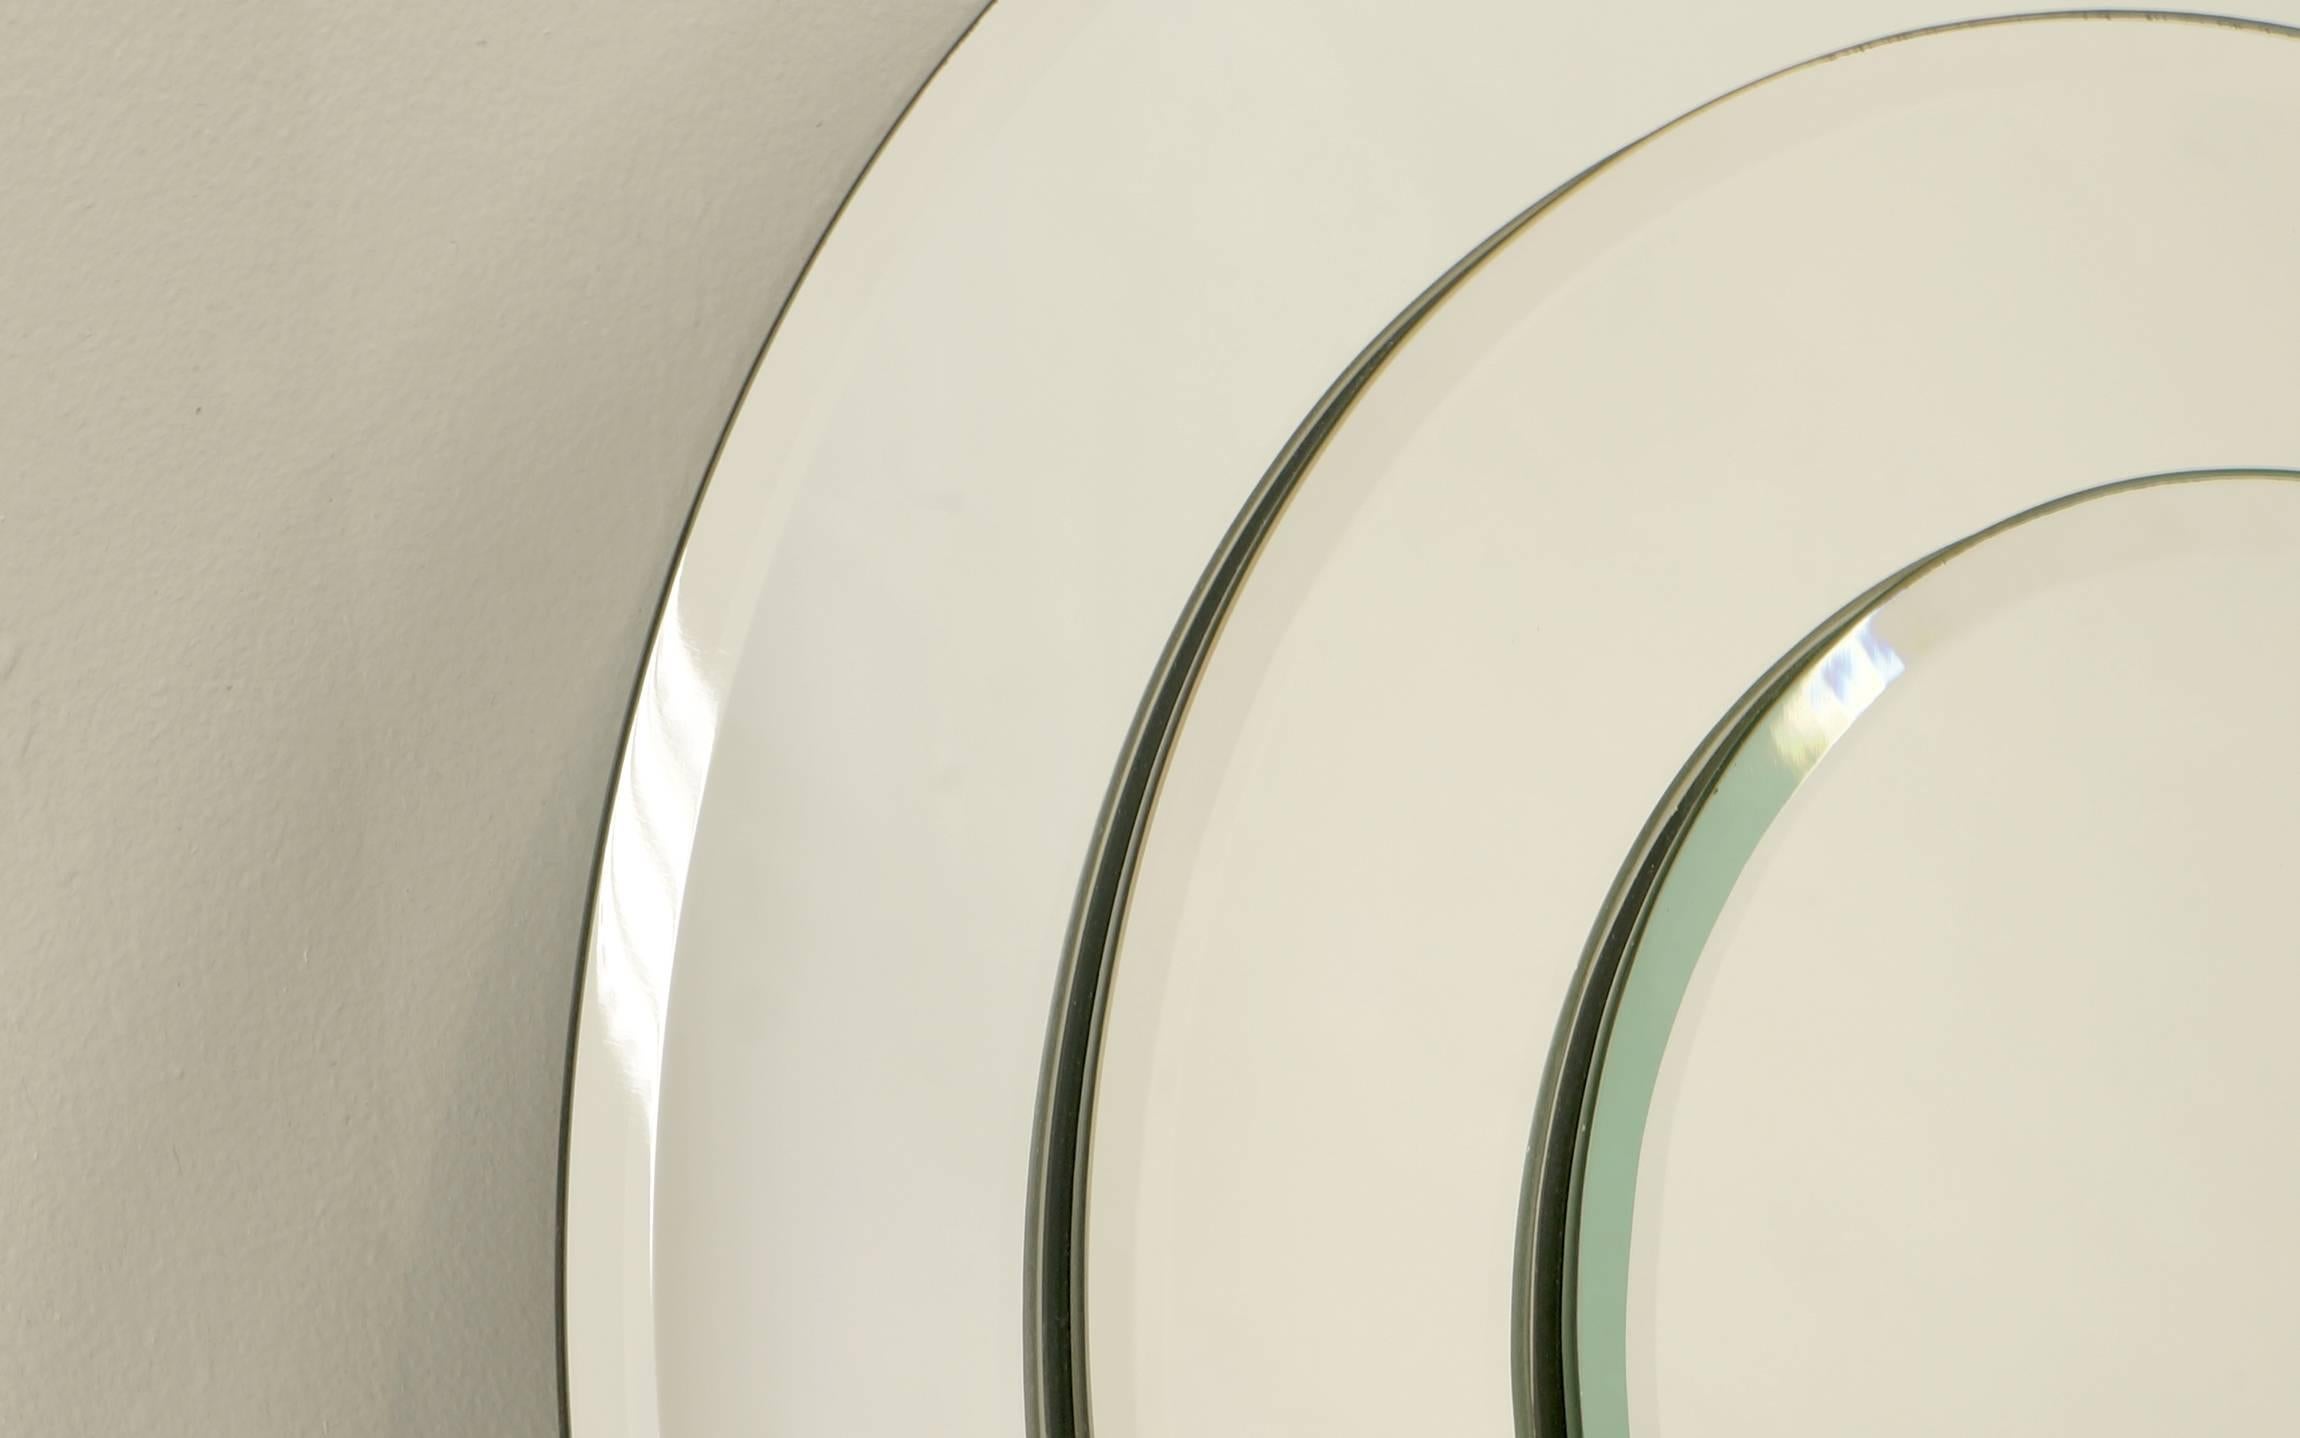 Late 20th Century Wall Mirror of Concentric Circles with Chrome Frame by the Mitre Shop, 1975